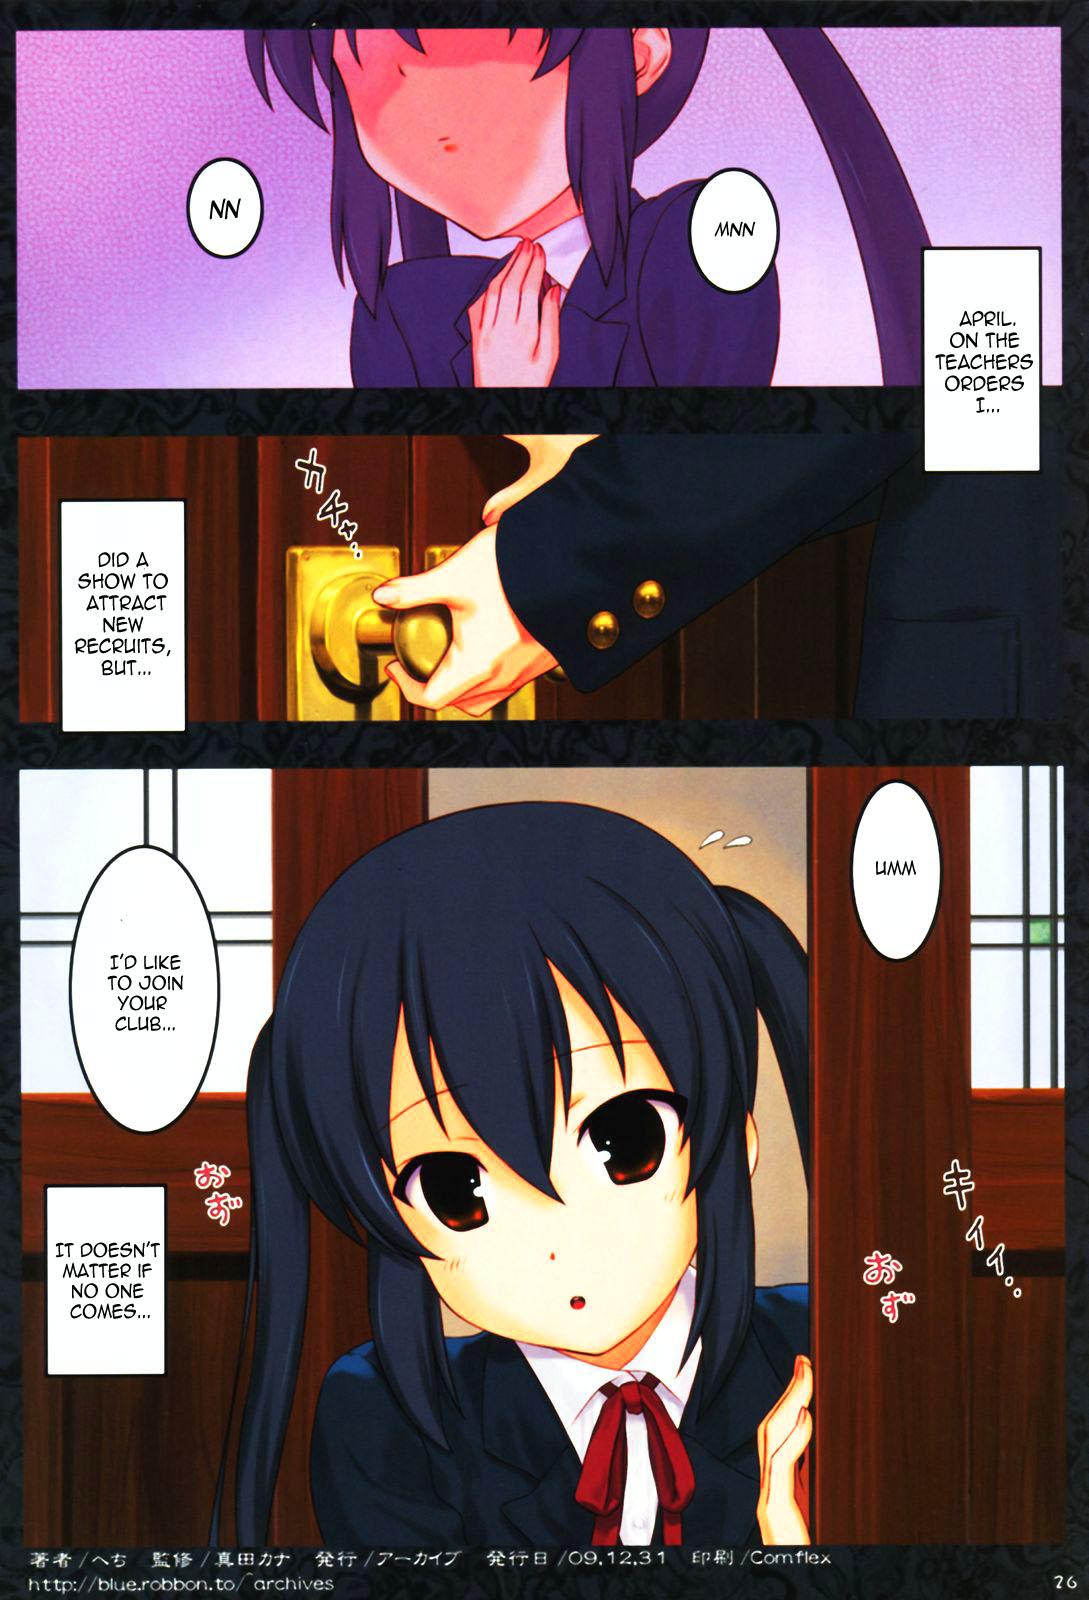 Teenager (C77) [Archives (Hechi)] Ura K-ON!! 2 | The Other K-ON!! 2 (K-ON!) [English] =LWB= - K-on Facebook - Page 26